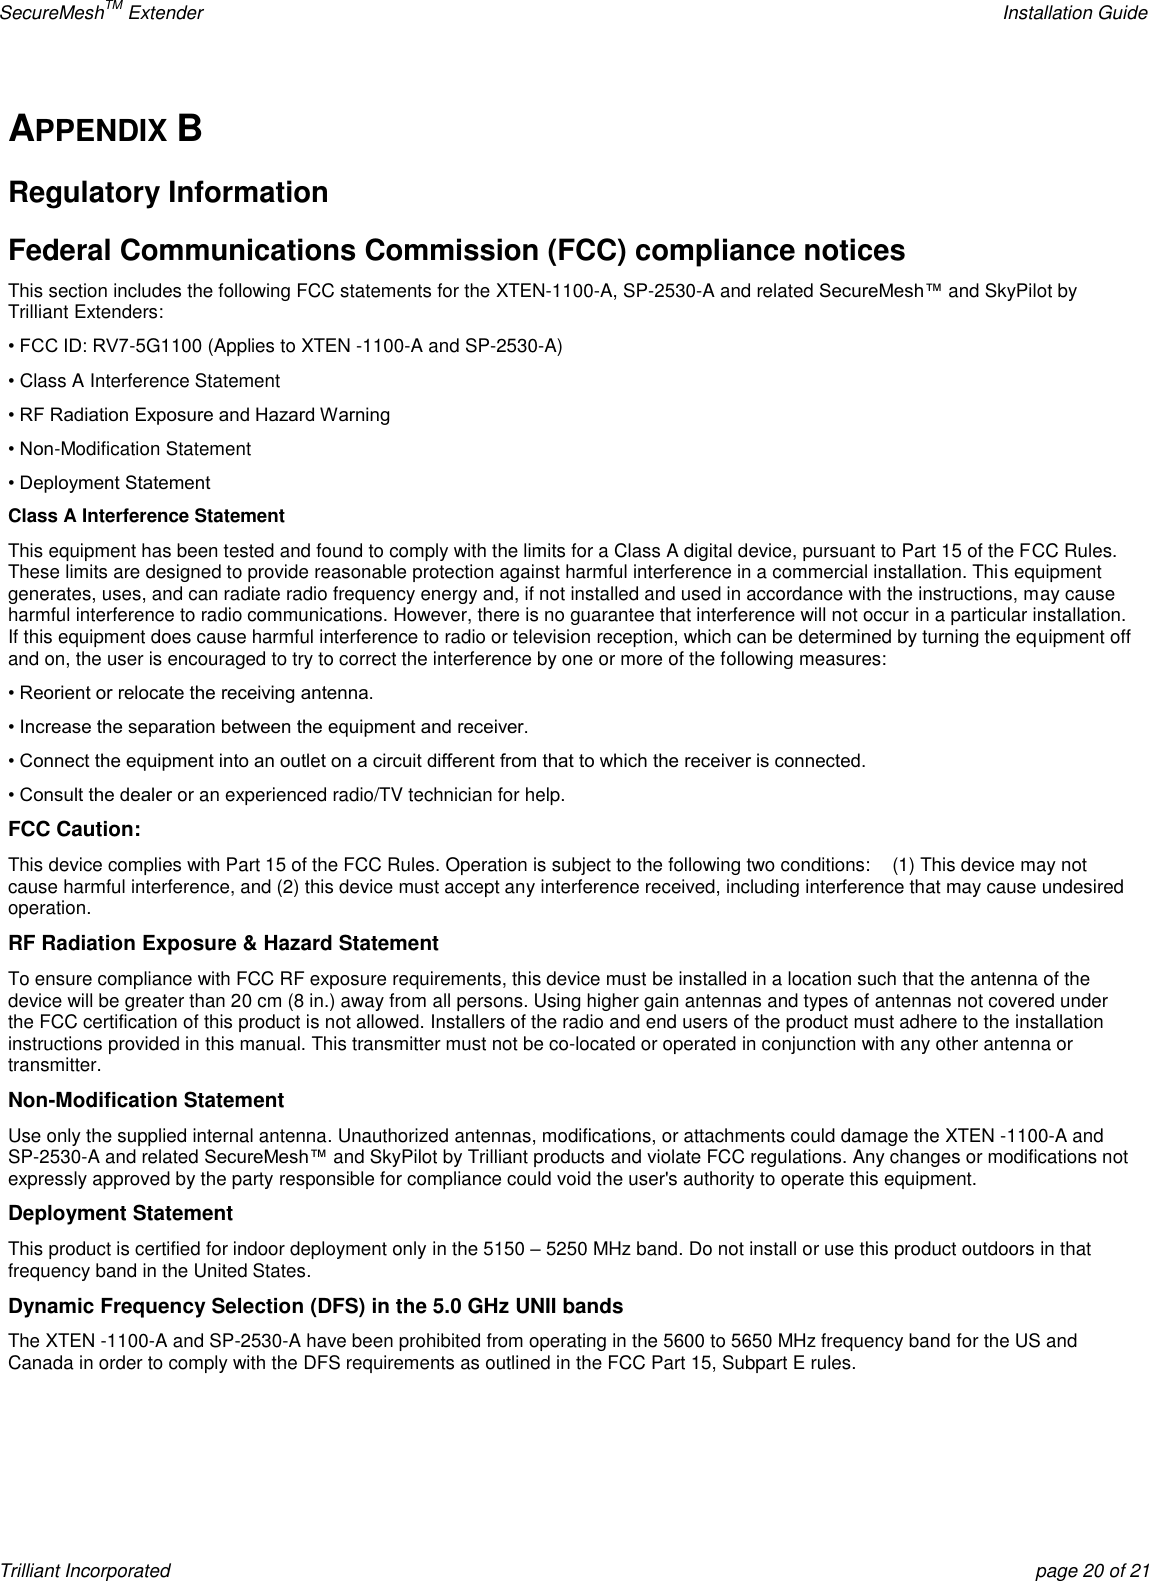 SecureMeshTM Extender    Installation Guide Trilliant Incorporated  page 20 of 21 APPENDIX B Regulatory Information Federal Communications Commission (FCC) compliance notices This section includes the following FCC statements for the XTEN-1100-A, SP-2530-A and related SecureMesh™ and SkyPilot by Trilliant Extenders: • FCC ID: RV7-5G1100 (Applies to XTEN -1100-A and SP-2530-A) • Class A Interference Statement • RF Radiation Exposure and Hazard Warning • Non-Modification Statement • Deployment Statement Class A Interference Statement This equipment has been tested and found to comply with the limits for a Class A digital device, pursuant to Part 15 of the FCC Rules. These limits are designed to provide reasonable protection against harmful interference in a commercial installation. This equipment generates, uses, and can radiate radio frequency energy and, if not installed and used in accordance with the instructions, may cause harmful interference to radio communications. However, there is no guarantee that interference will not occur in a particular installation. If this equipment does cause harmful interference to radio or television reception, which can be determined by turning the equipment off and on, the user is encouraged to try to correct the interference by one or more of the following measures: • Reorient or relocate the receiving antenna. • Increase the separation between the equipment and receiver. • Connect the equipment into an outlet on a circuit different from that to which the receiver is connected. • Consult the dealer or an experienced radio/TV technician for help. FCC Caution: This device complies with Part 15 of the FCC Rules. Operation is subject to the following two conditions:    (1) This device may not cause harmful interference, and (2) this device must accept any interference received, including interference that may cause undesired operation. RF Radiation Exposure &amp; Hazard Statement To ensure compliance with FCC RF exposure requirements, this device must be installed in a location such that the antenna of the device will be greater than 20 cm (8 in.) away from all persons. Using higher gain antennas and types of antennas not covered under the FCC certification of this product is not allowed. Installers of the radio and end users of the product must adhere to the installation instructions provided in this manual. This transmitter must not be co-located or operated in conjunction with any other antenna or transmitter. Non-Modification Statement Use only the supplied internal antenna. Unauthorized antennas, modifications, or attachments could damage the XTEN -1100-A and SP-2530-A and related SecureMesh™ and SkyPilot by Trilliant products and violate FCC regulations. Any changes or modifications not expressly approved by the party responsible for compliance could void the user&apos;s authority to operate this equipment. Deployment Statement This product is certified for indoor deployment only in the 5150 – 5250 MHz band. Do not install or use this product outdoors in that frequency band in the United States. Dynamic Frequency Selection (DFS) in the 5.0 GHz UNII bands The XTEN -1100-A and SP-2530-A have been prohibited from operating in the 5600 to 5650 MHz frequency band for the US and Canada in order to comply with the DFS requirements as outlined in the FCC Part 15, Subpart E rules.    